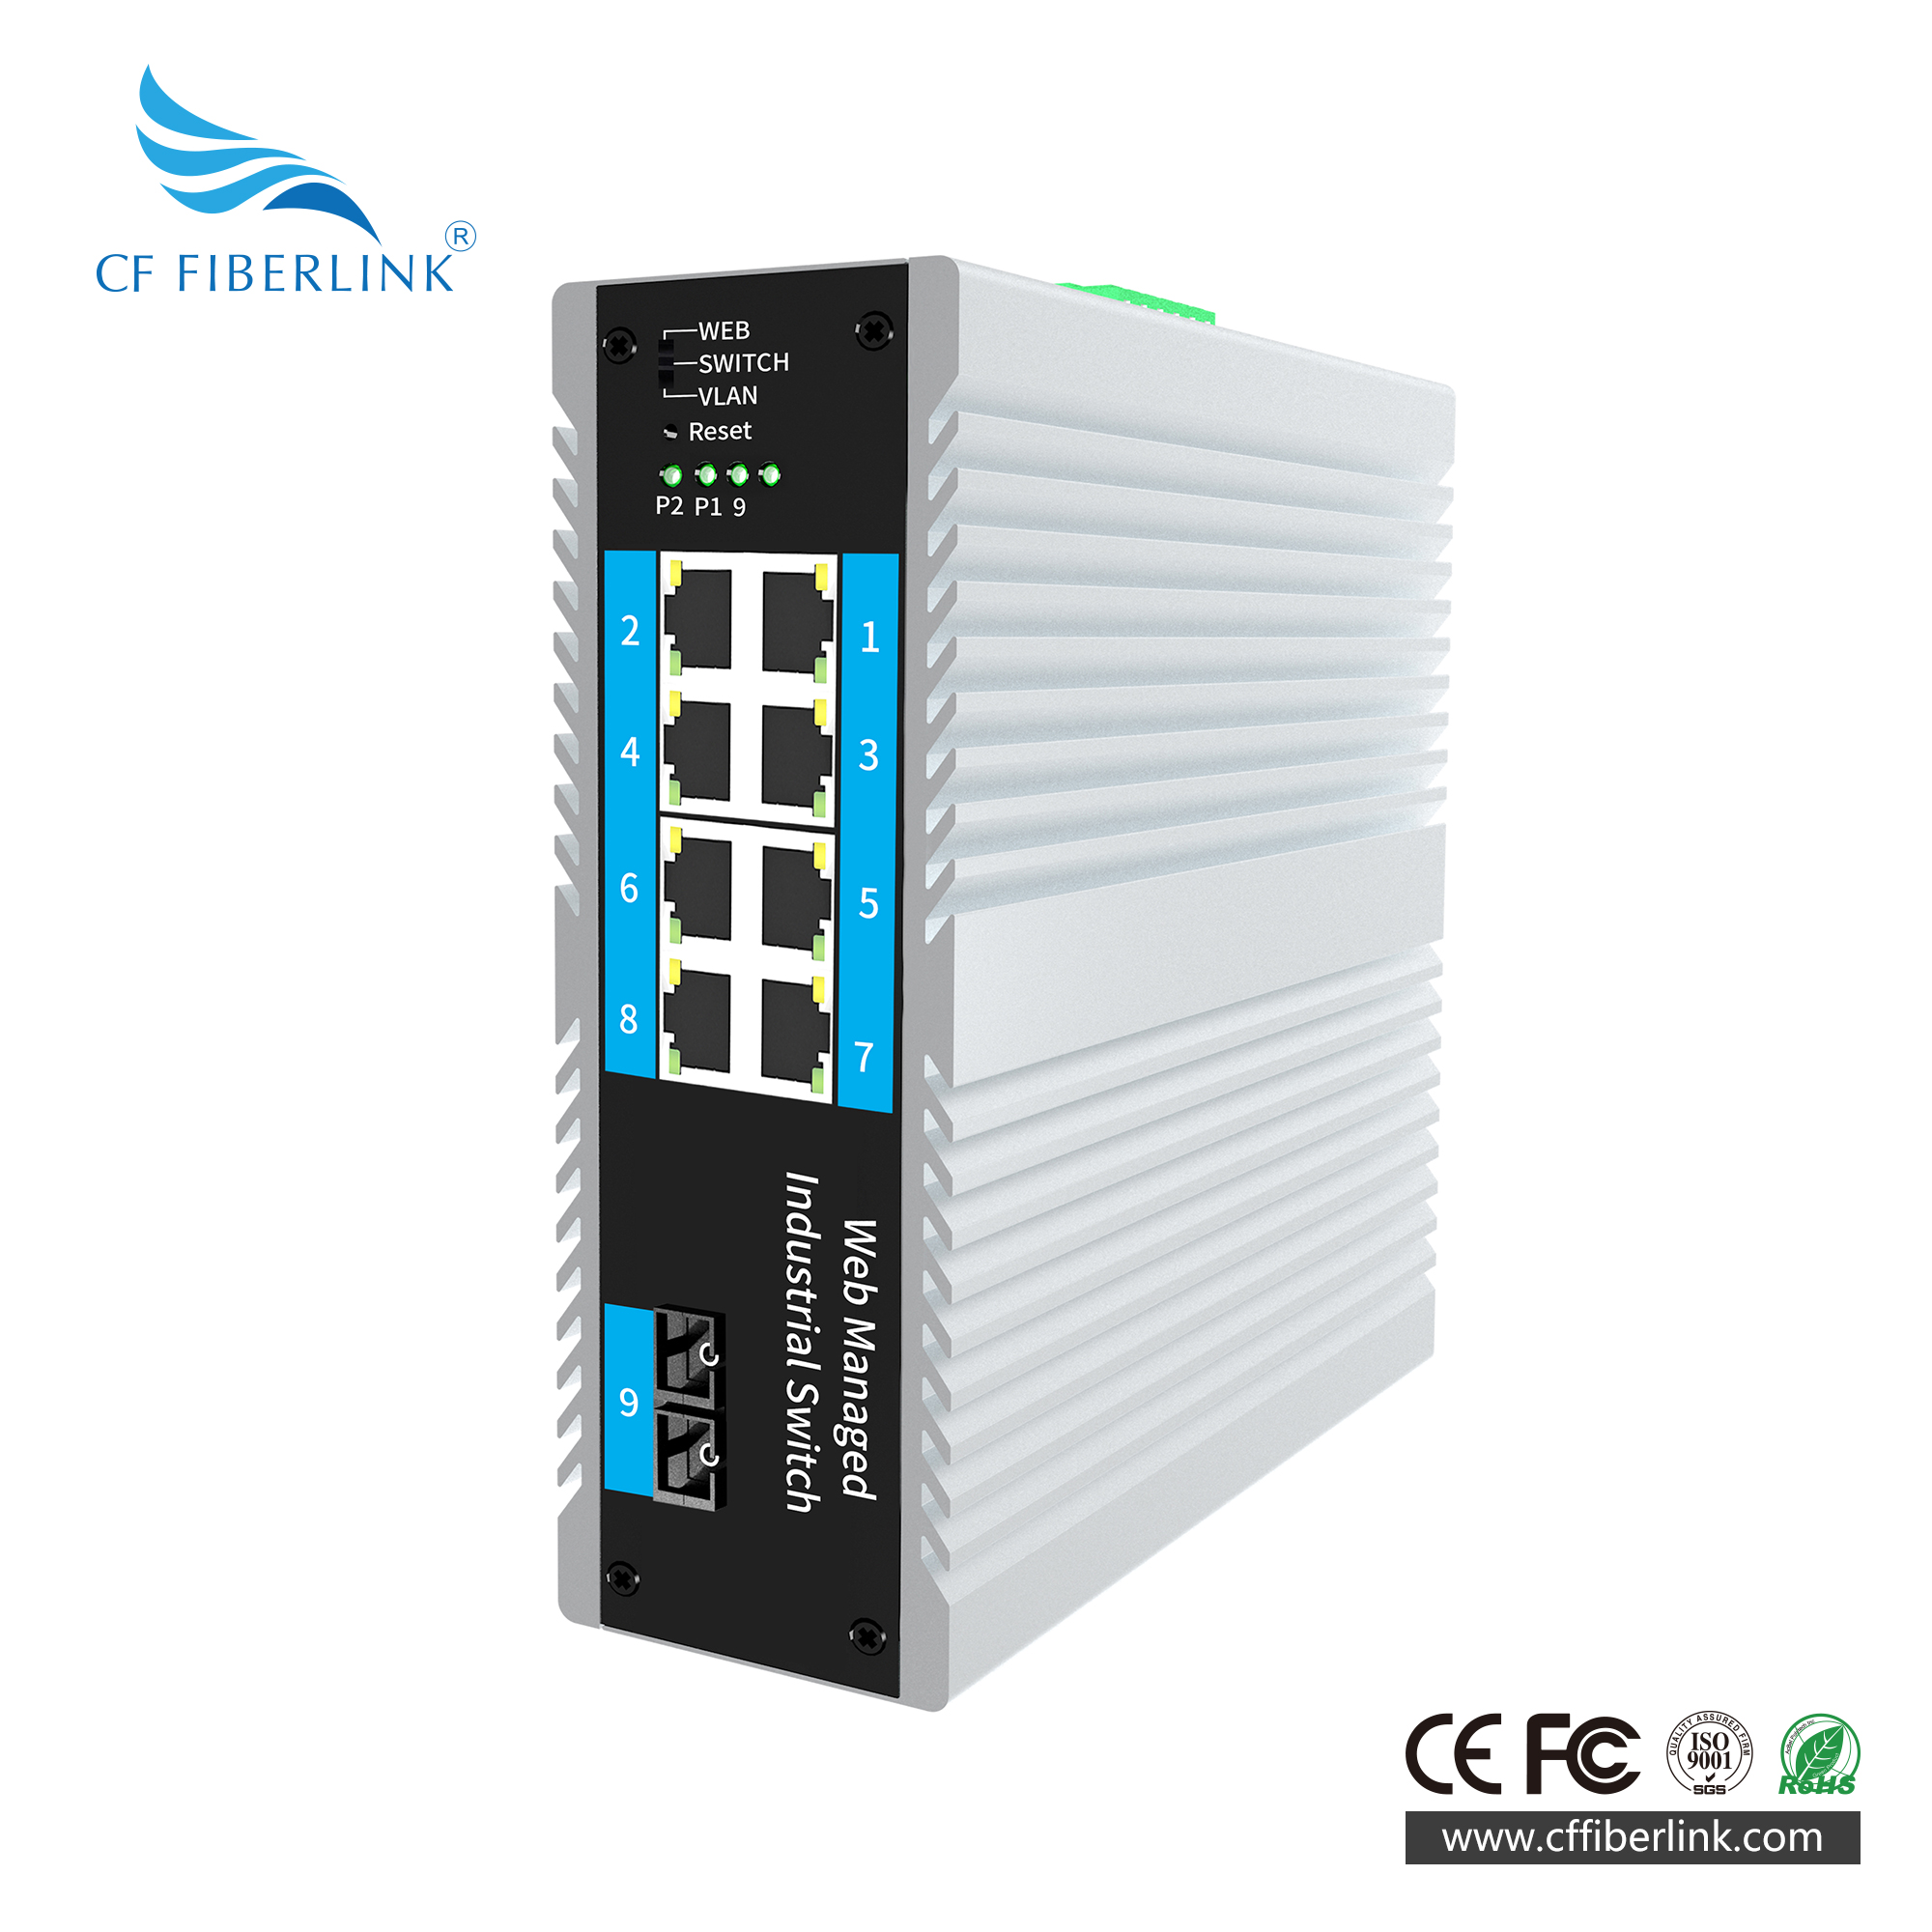 9-port 10/100M/1000M Industrial Ethernet Switch